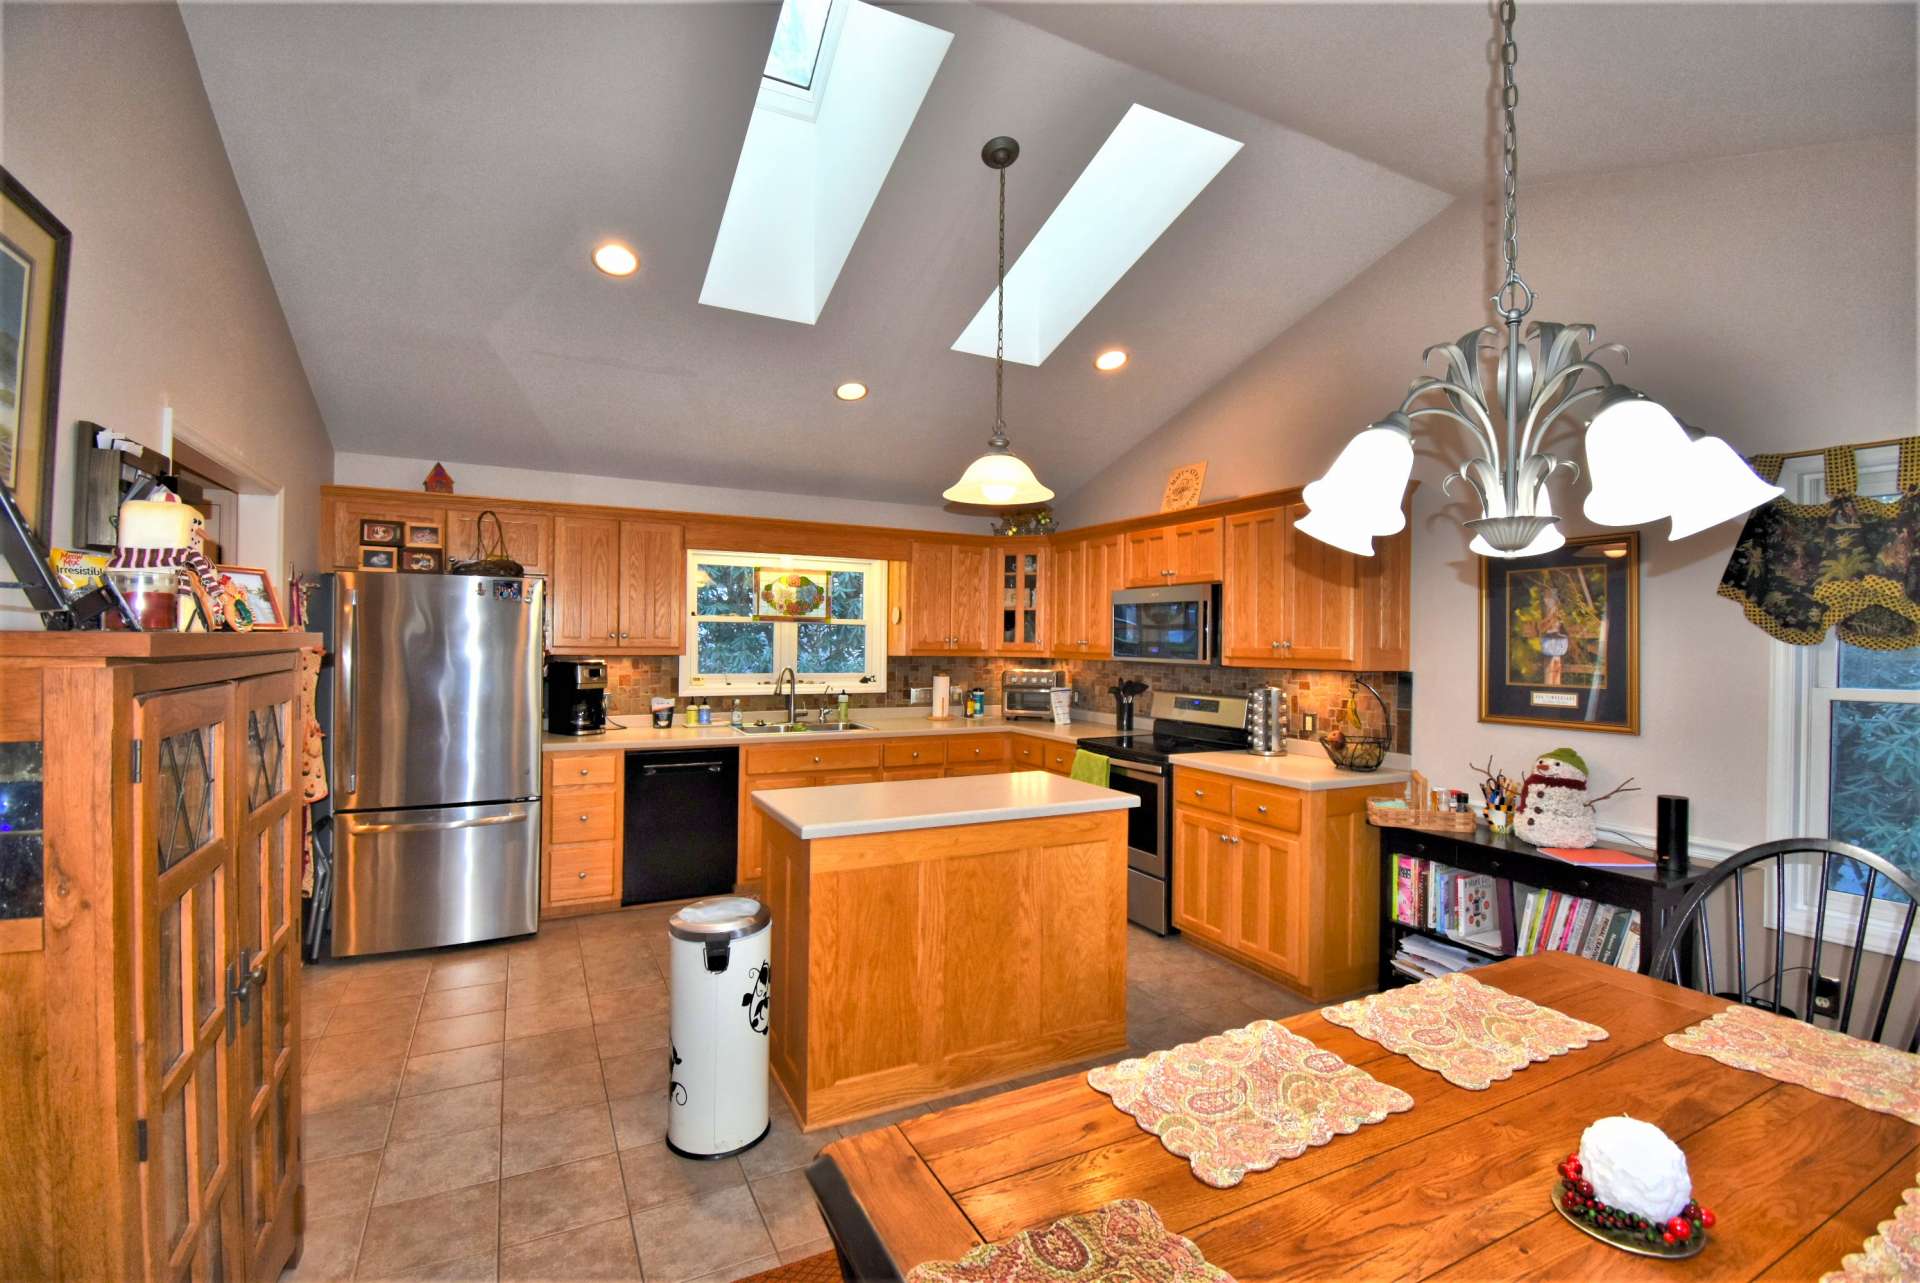 Skylights in the large kitchen area keep this space nice and bright.